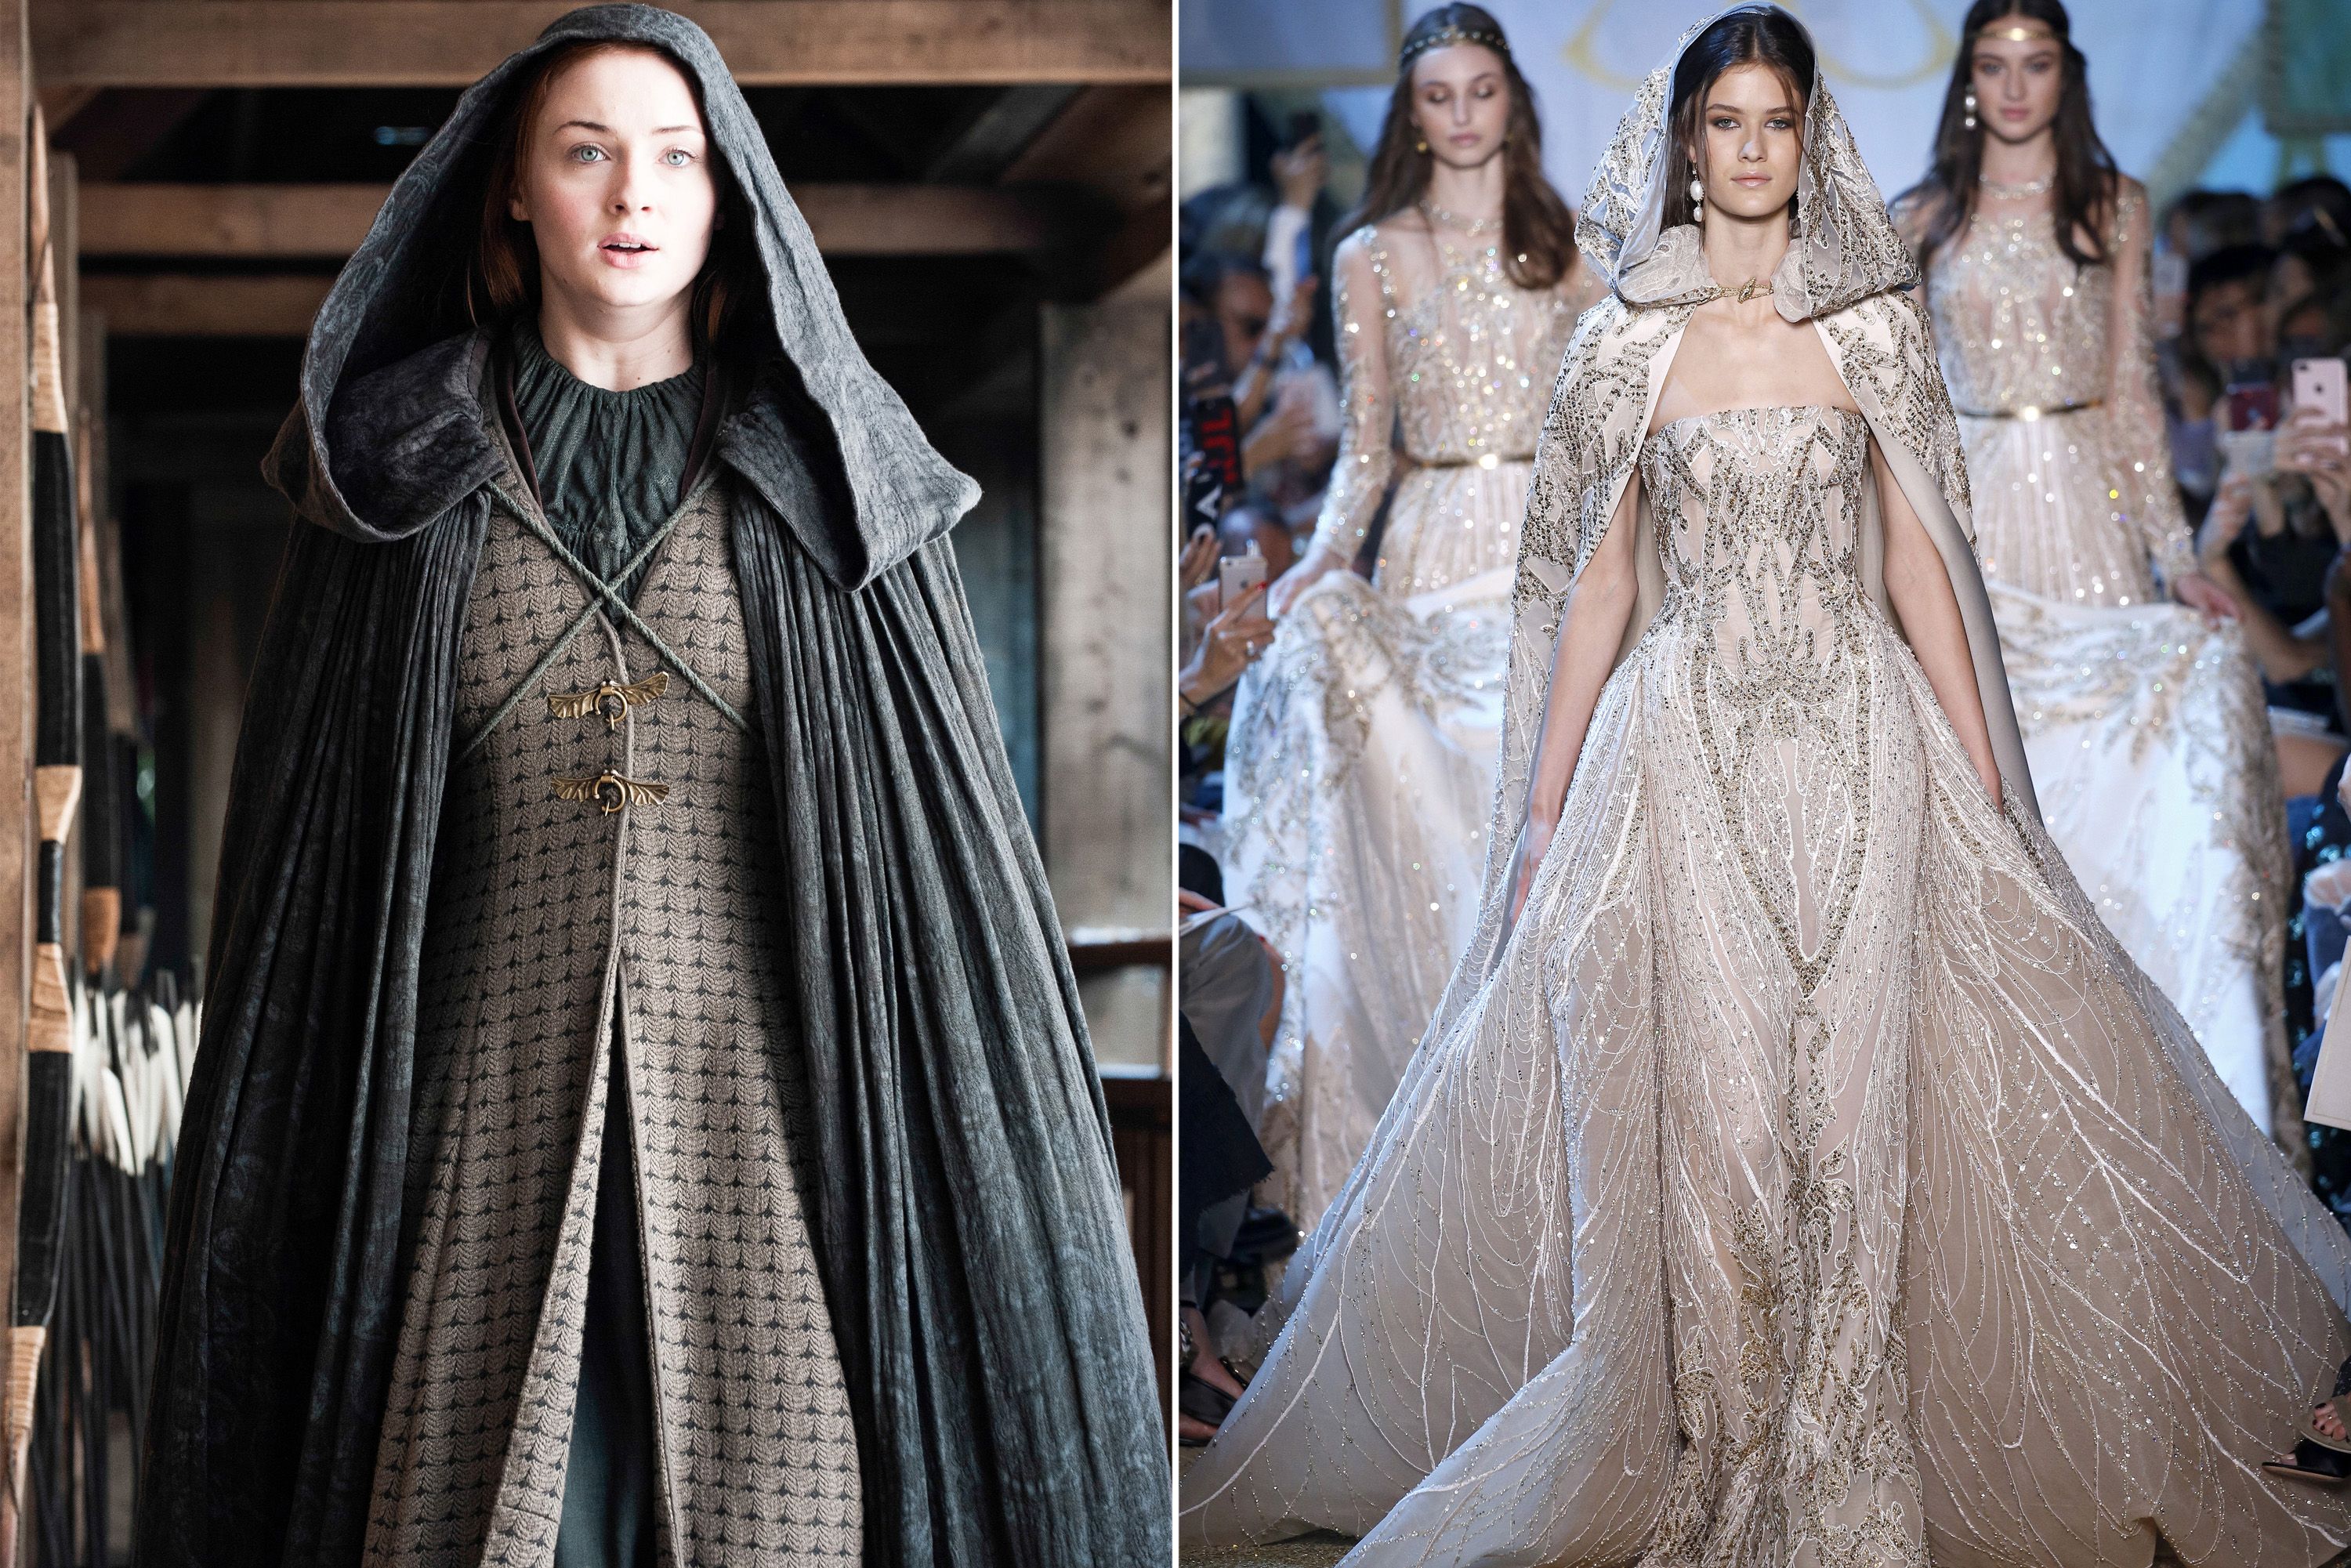 The Elie Saab Wedding Dress and 3 More Wedding-y Dresses From the